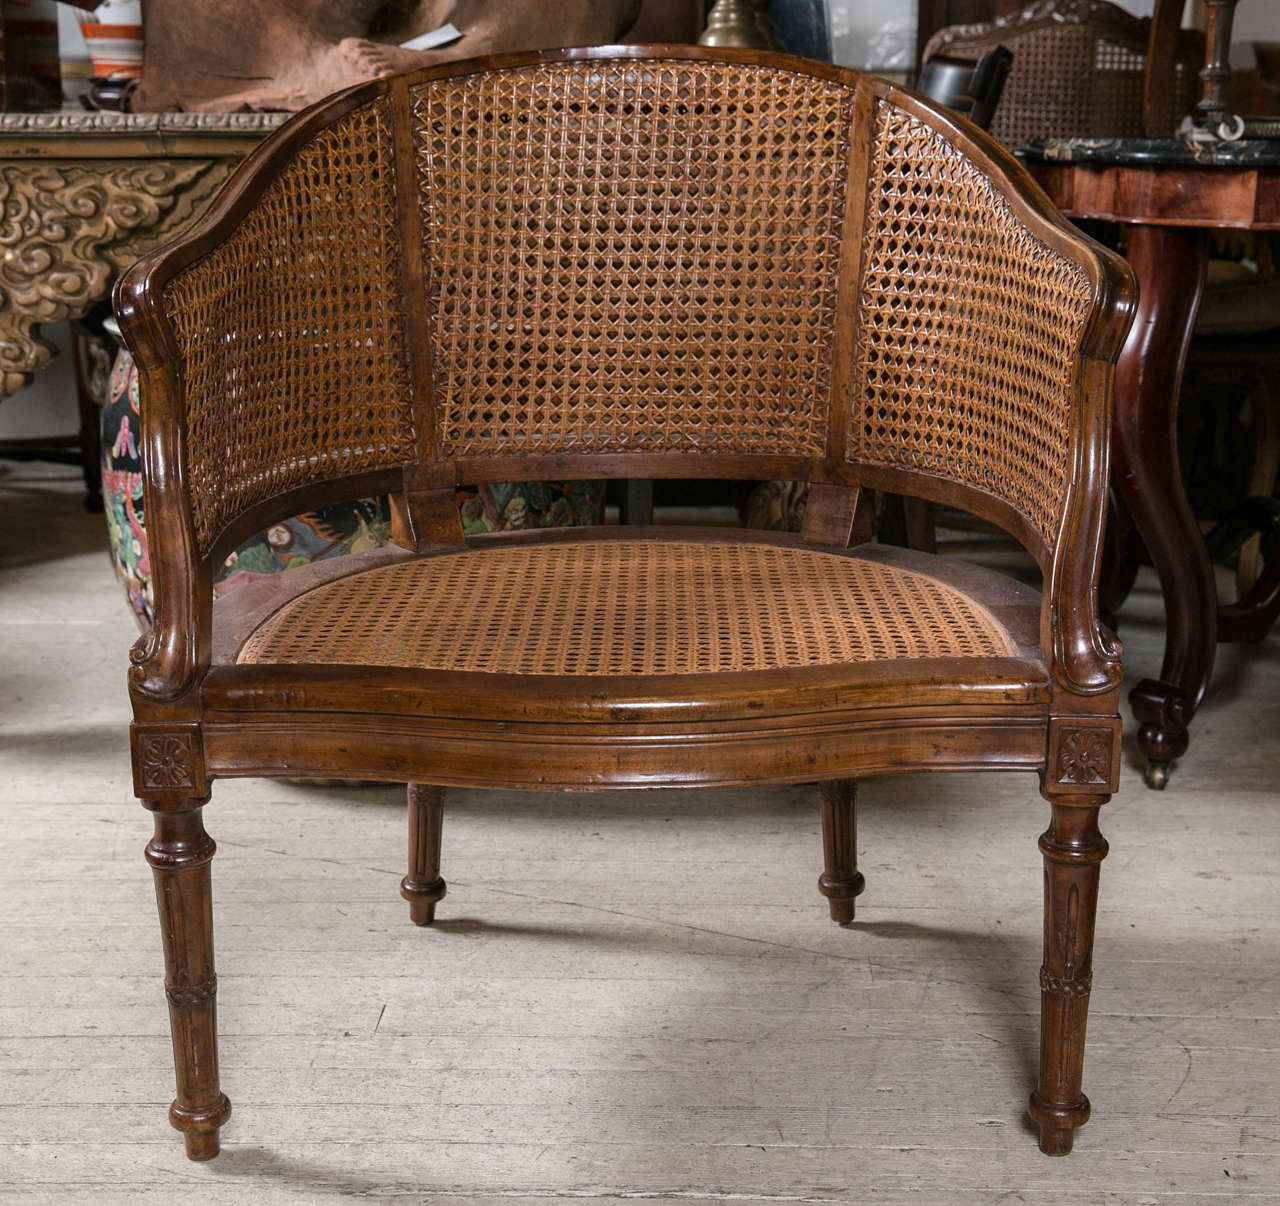 This chair in the bergere manor has caned seat, back and sides. The back rail forms the contiguous arms which gently curve to the seat rail. The front of the seat rail is a slight serpentine form. The back and sides are rounded. Raised on tapered